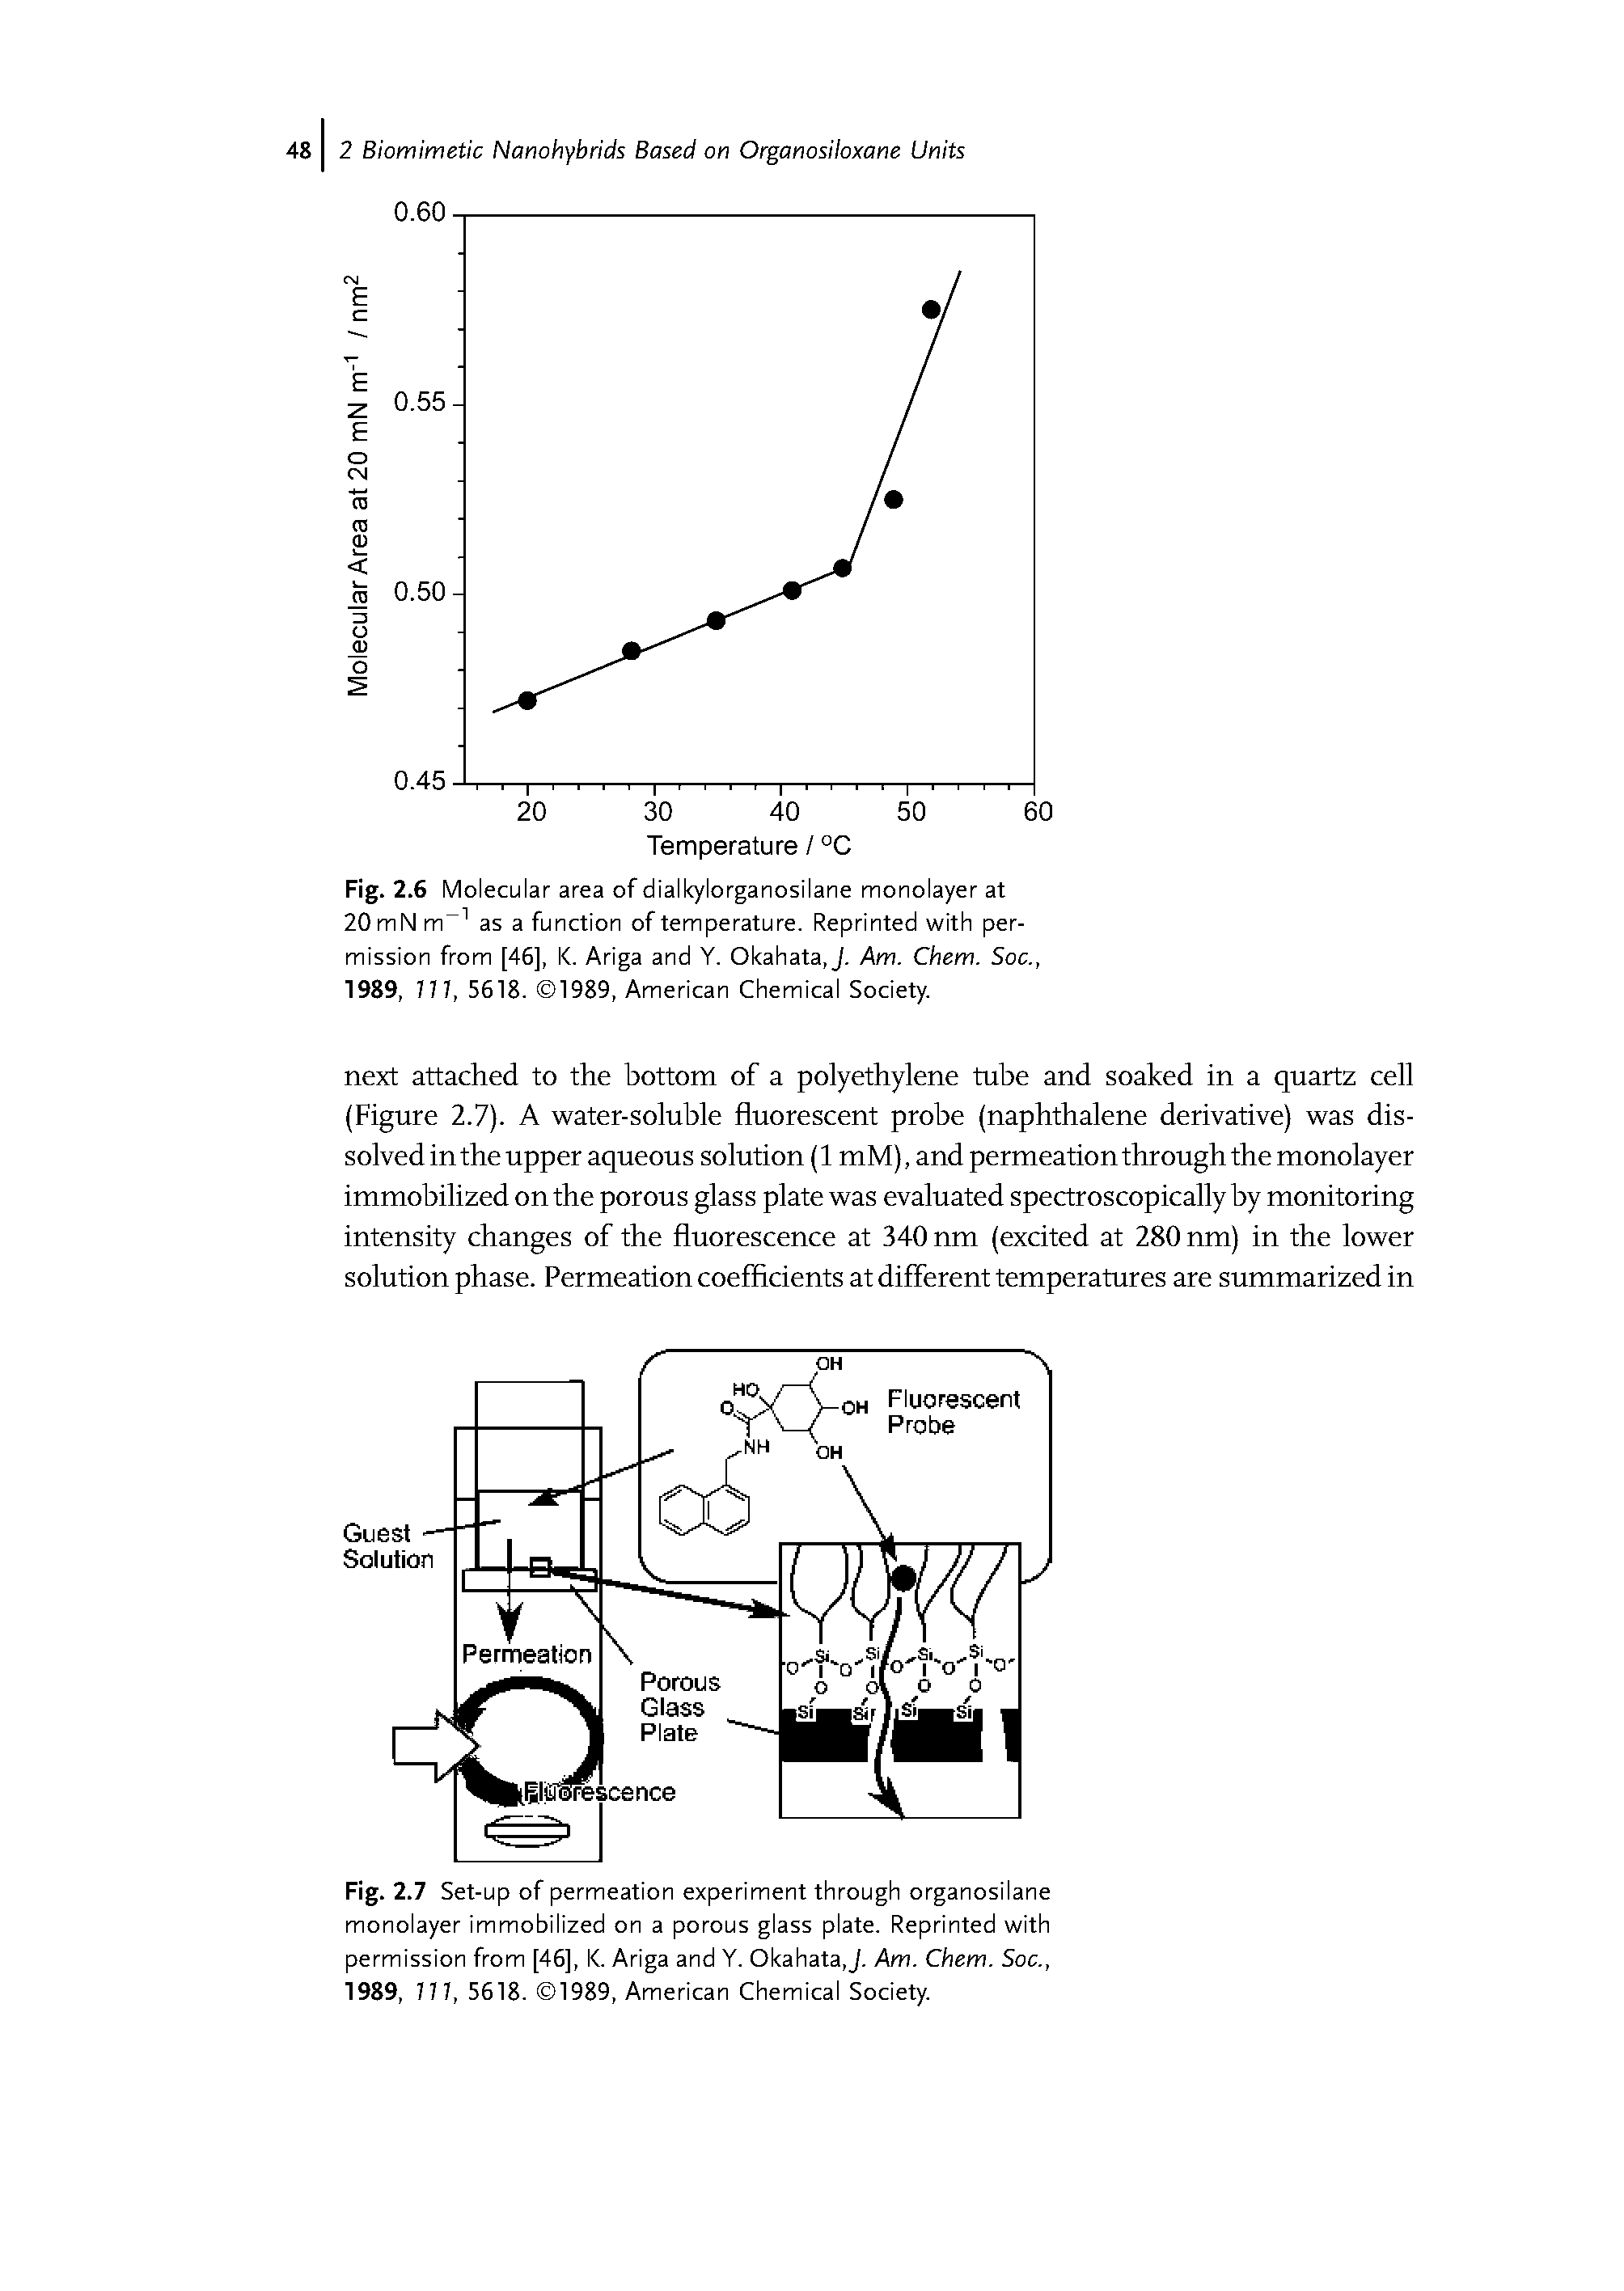 Fig. 2.7 Set-up of permeation experiment through organosilane monolayer immobilized on a porous glass plate. Reprinted with permission from [46], K. Ariga and Y. Okahata,J. Am. Chem. Soc., 1989, 77 7, 5618. 1989, American Chemical Society.